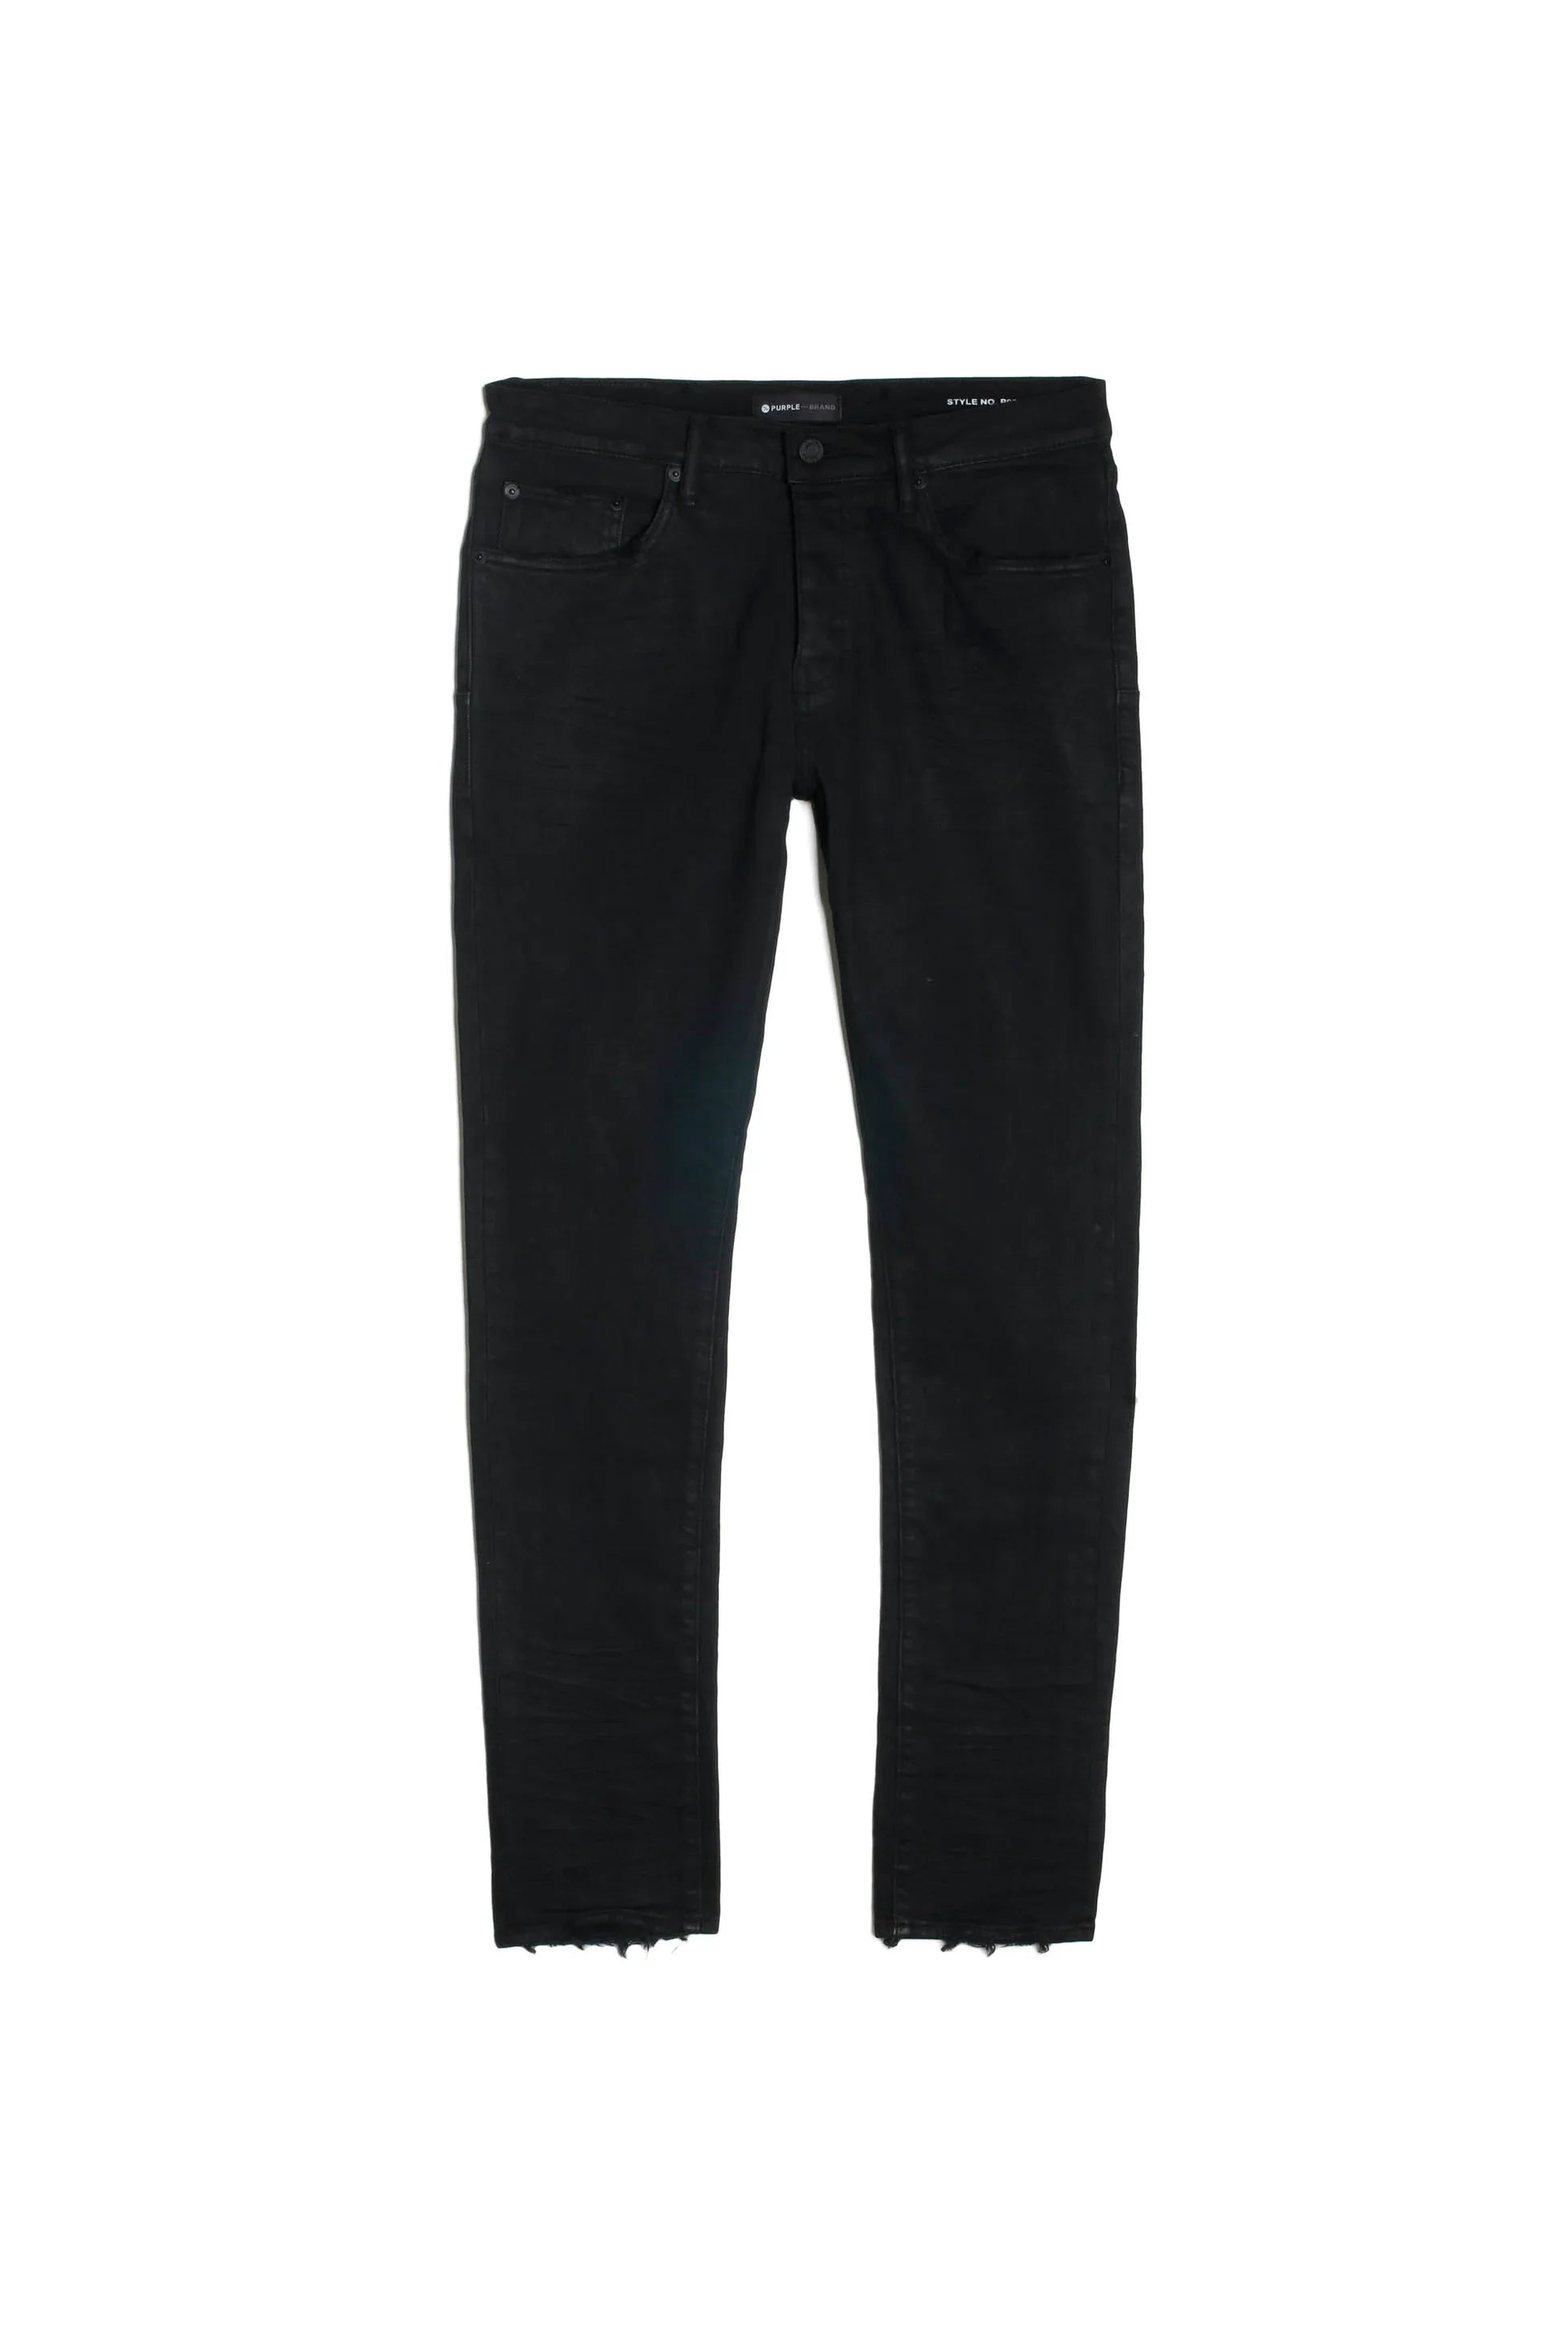 Purple Brand P002 Wash Blowout Tapered Jeans In Black